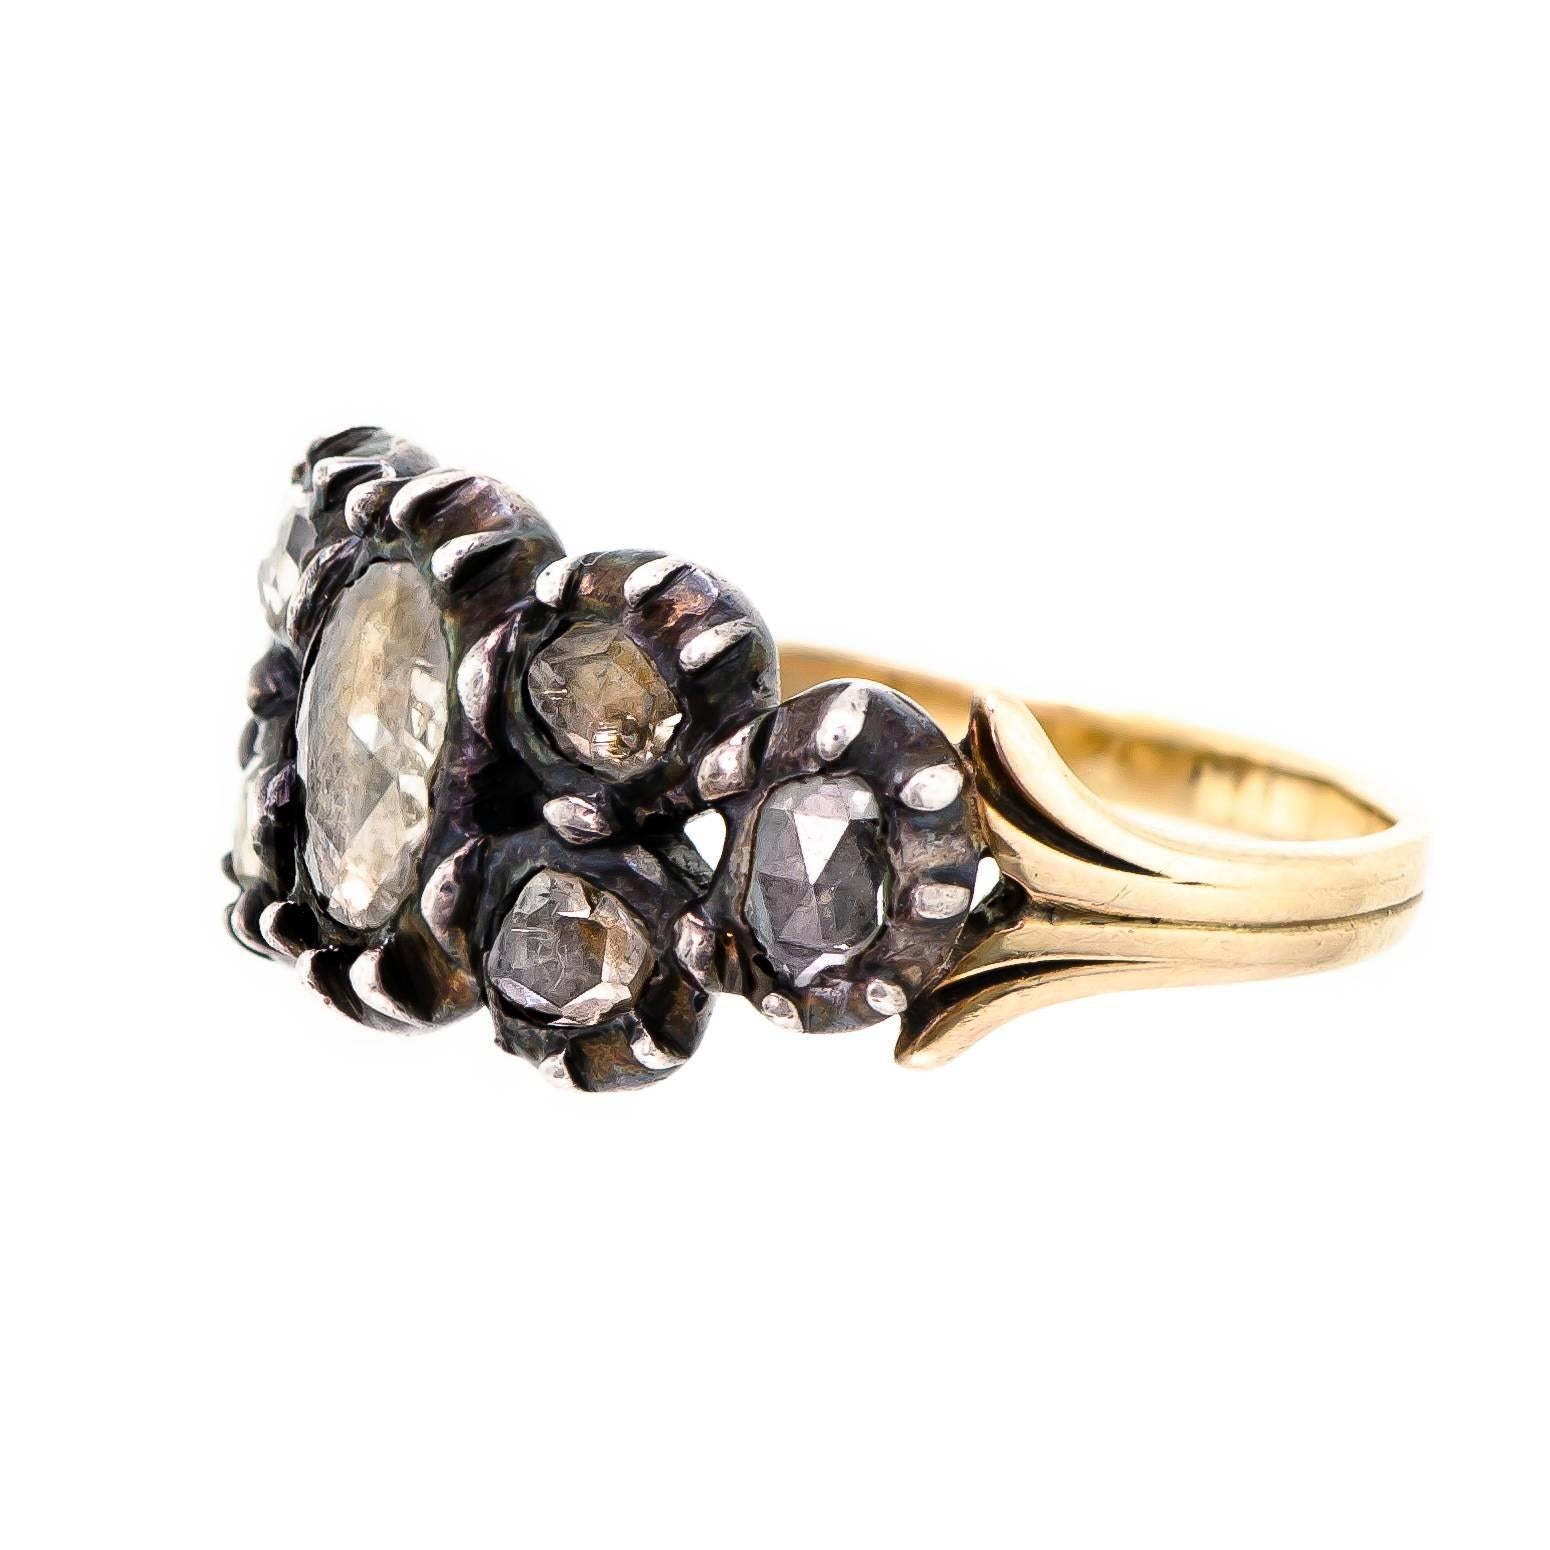 This alluring antique late Georgian early Victorian diamond ring is handcrafted in silver over yellow gold. Set with seven (7) crimped collet and prong closed-back majestic rose-cut diamonds of varying size. These beautiful diamonds are foil-backed